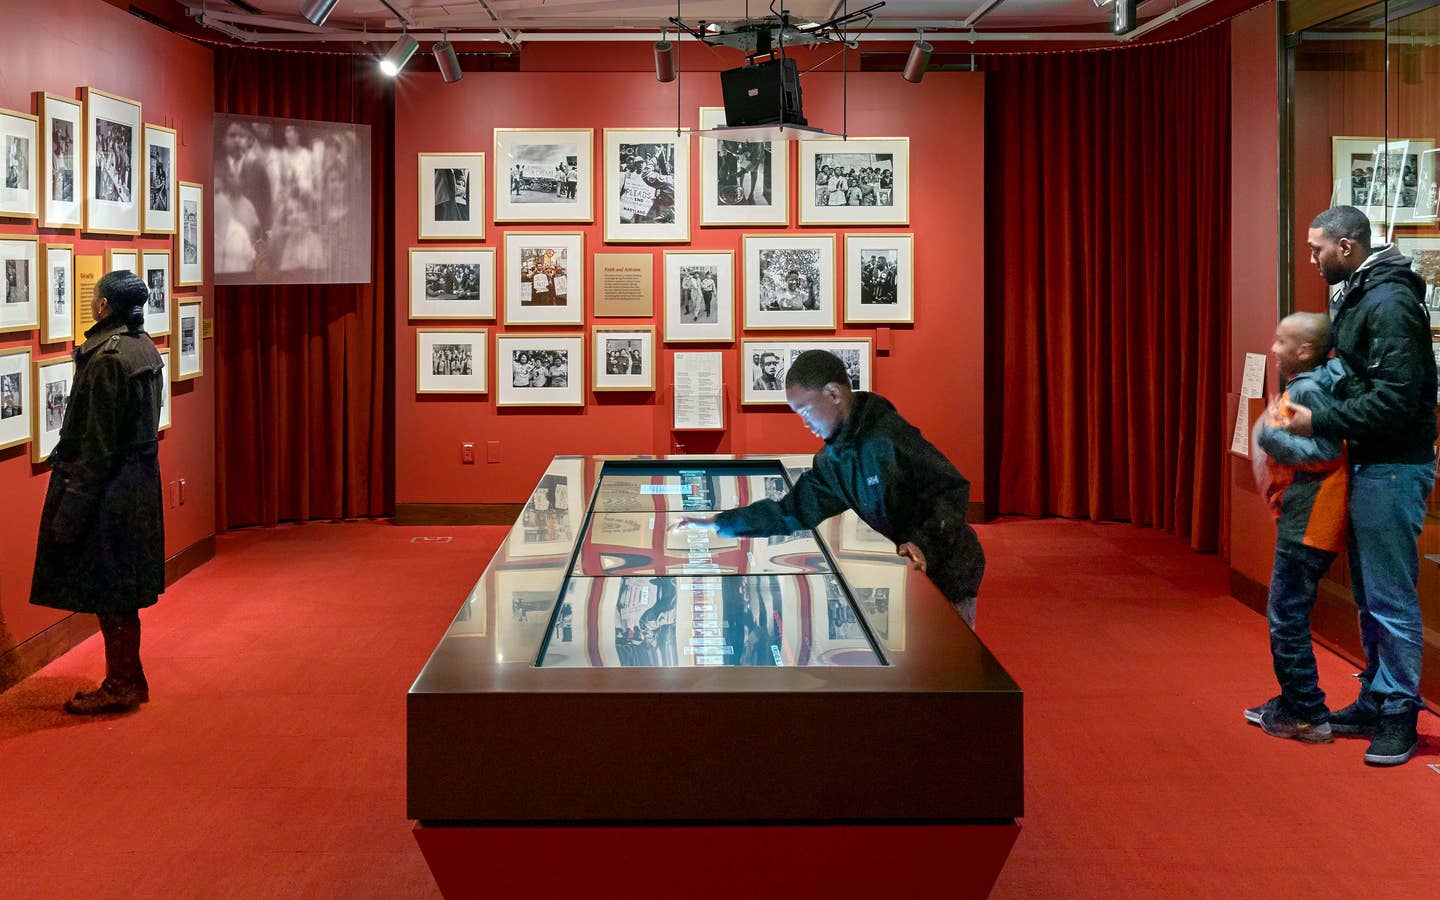 A woman, two young boys and a man stand in a red room curated with photography and video displays.